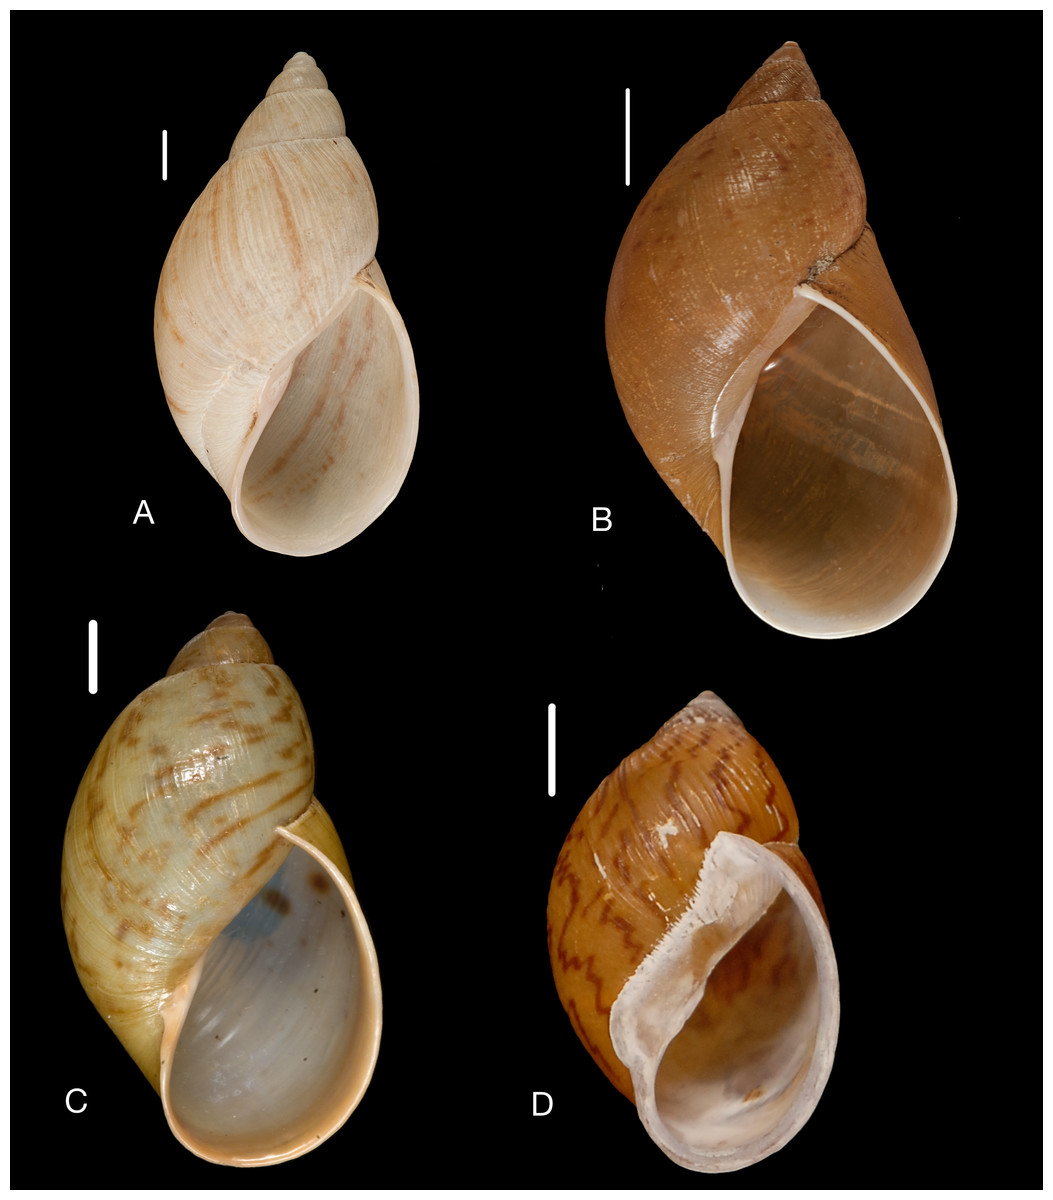 The Neotropical land snails (Mollusca, Gastropoda) collected by